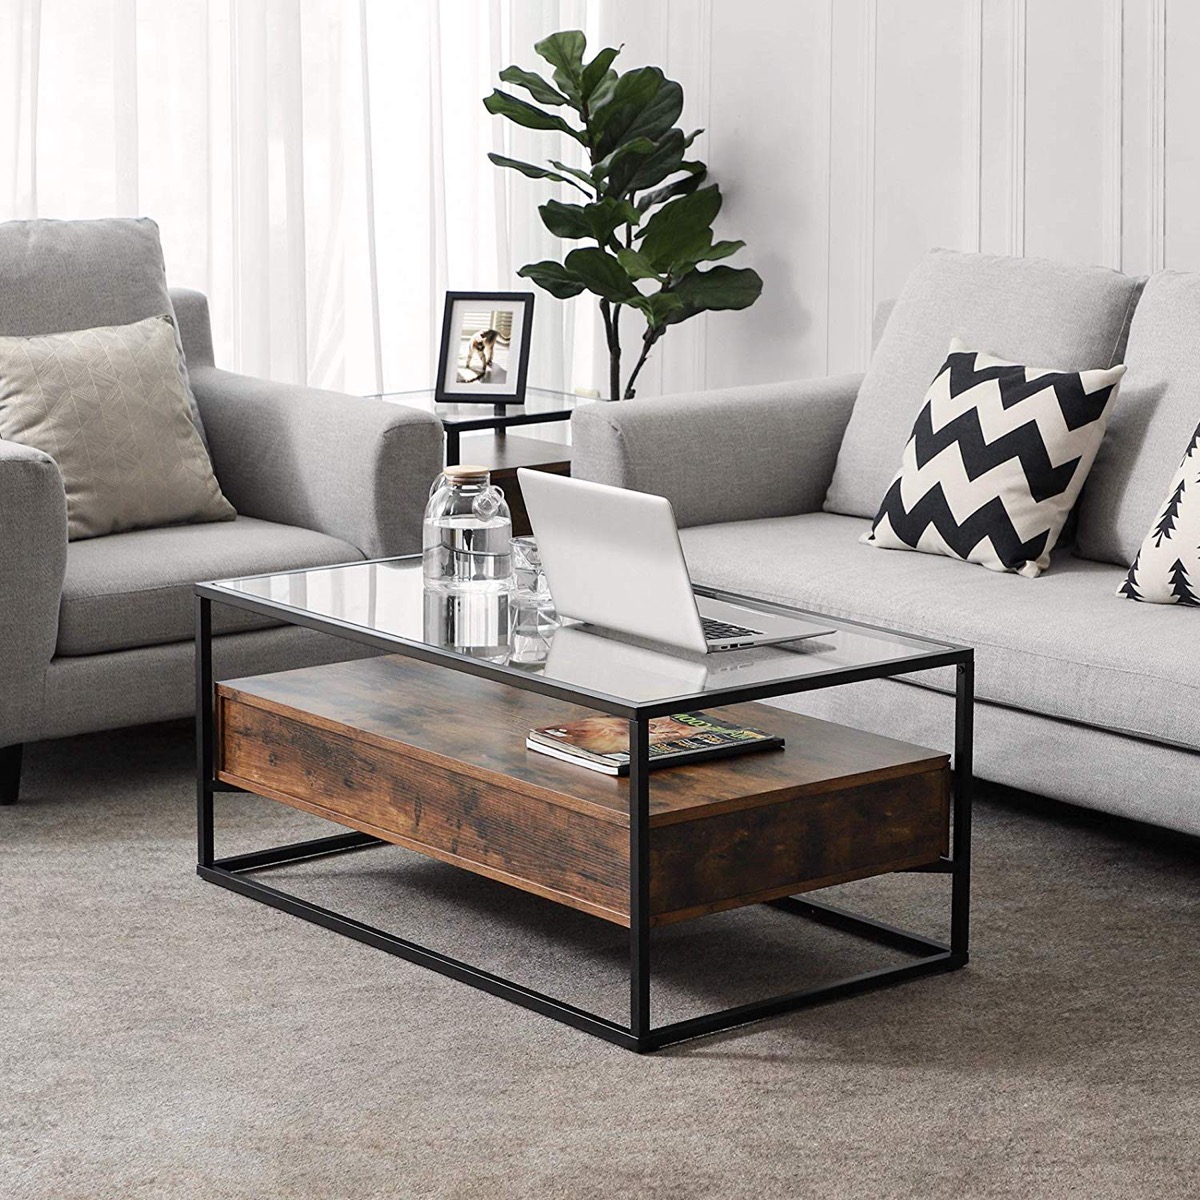 51 Glass Coffee Tables That Every, Living Room Table Design